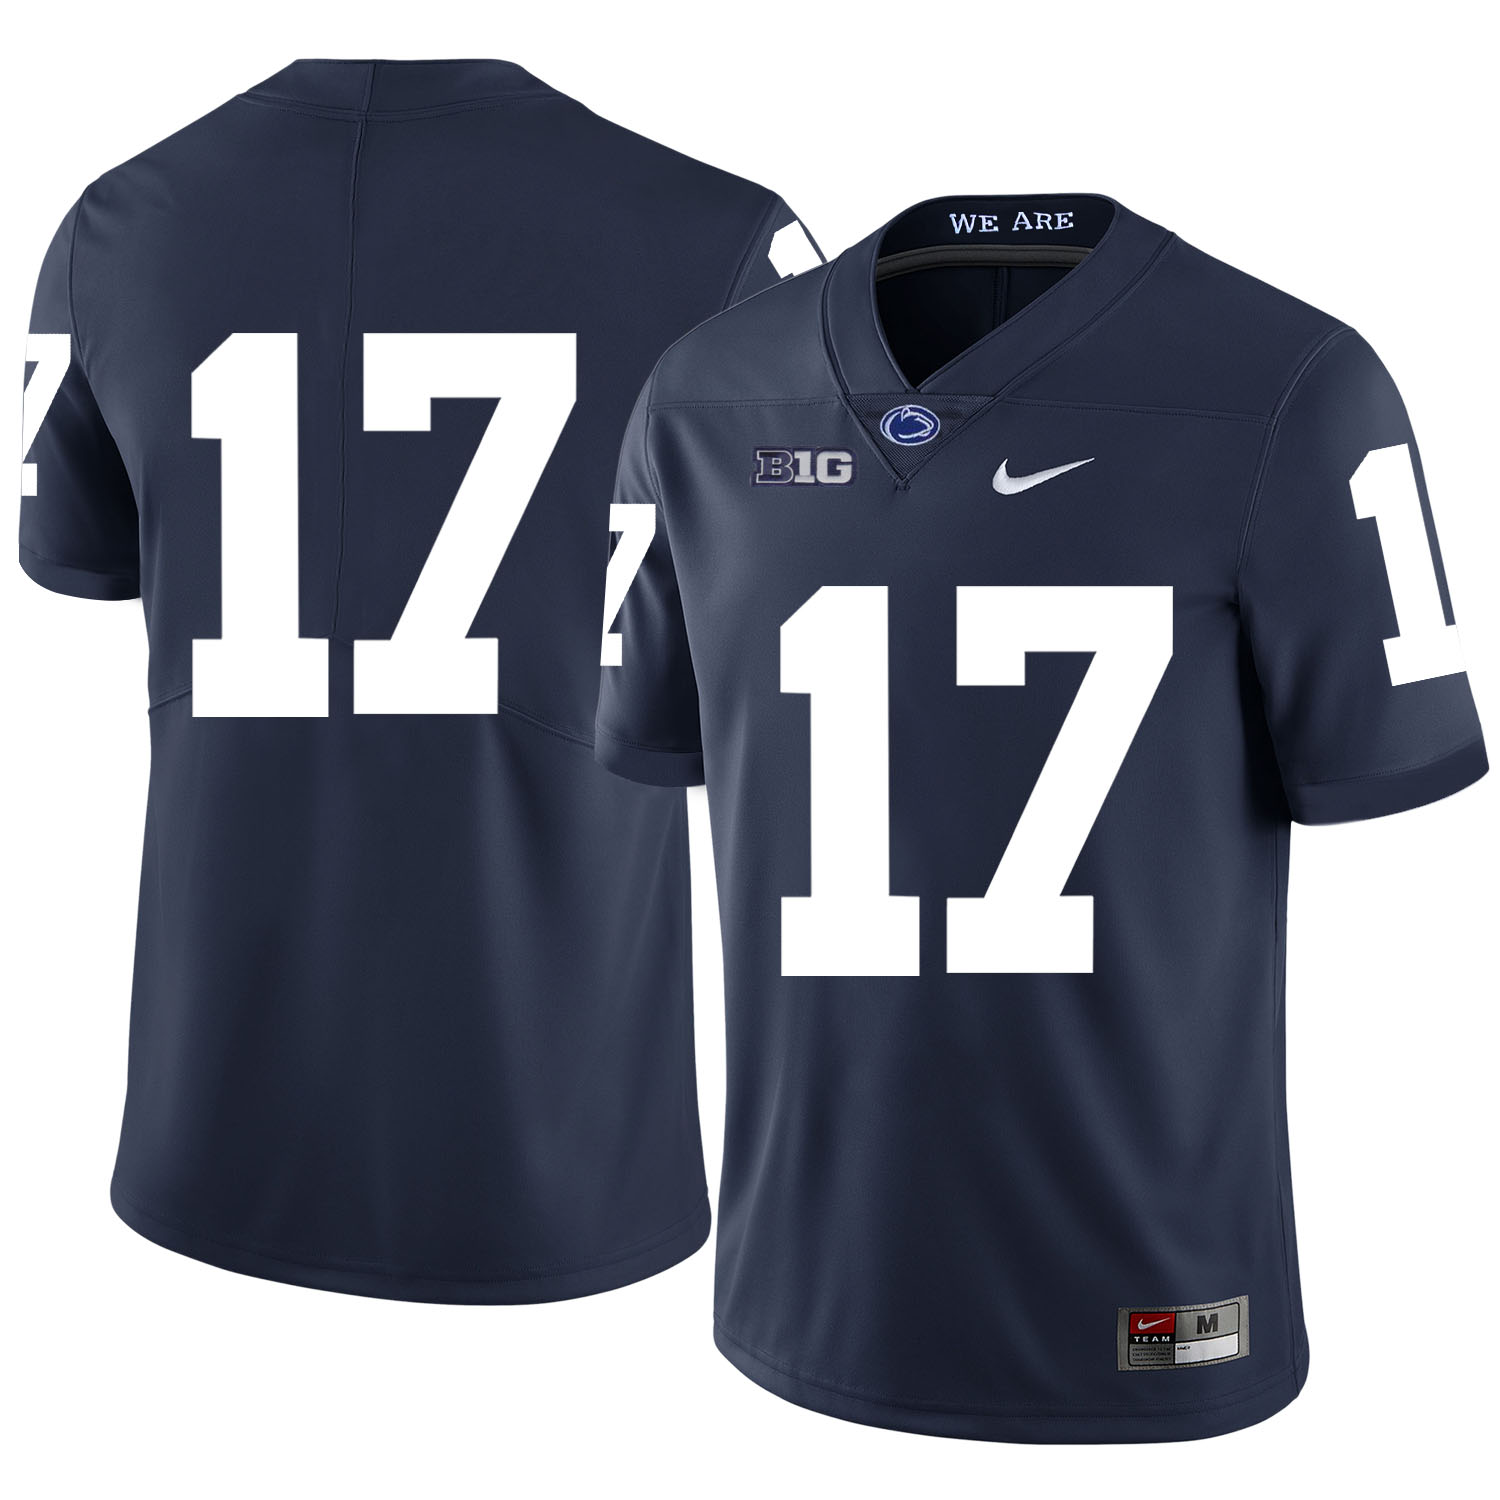 Penn State Nittany Lions 17 Generations Of Greatness Navy Nike College Football Jersey